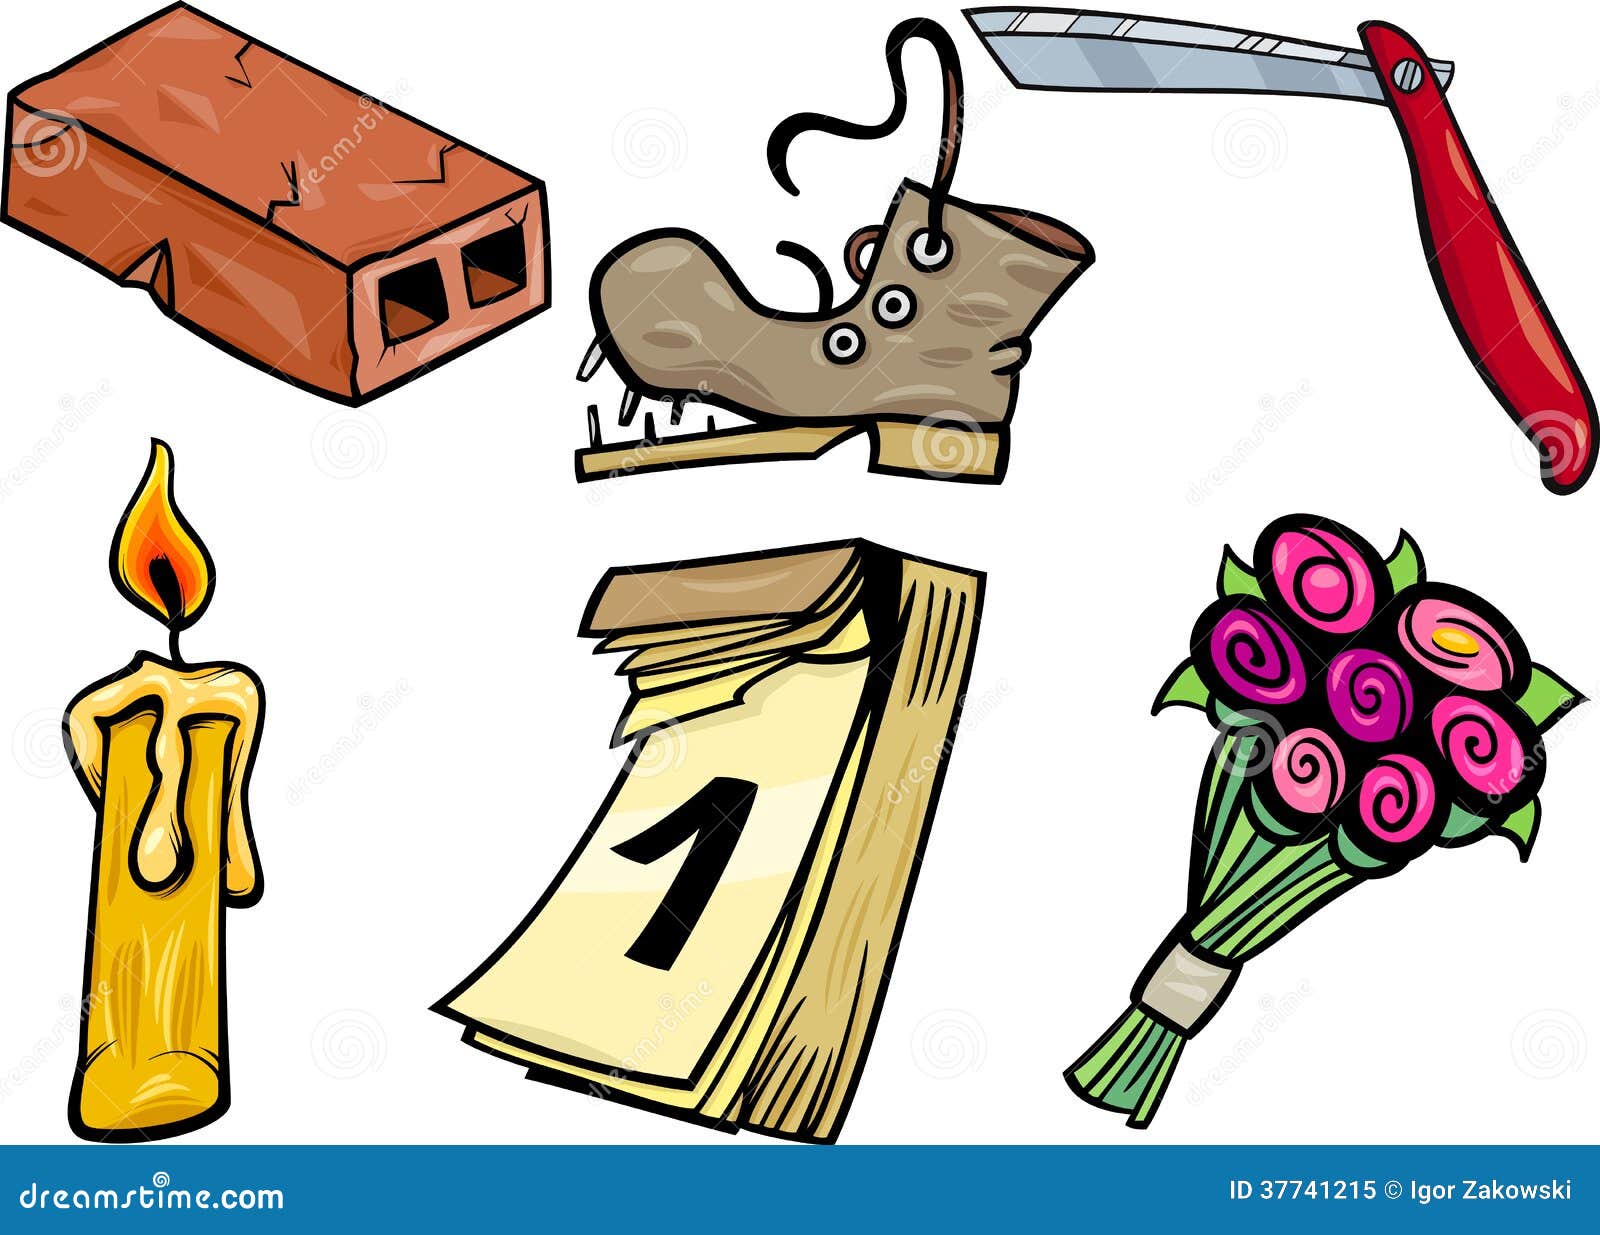 free clip art household objects - photo #17